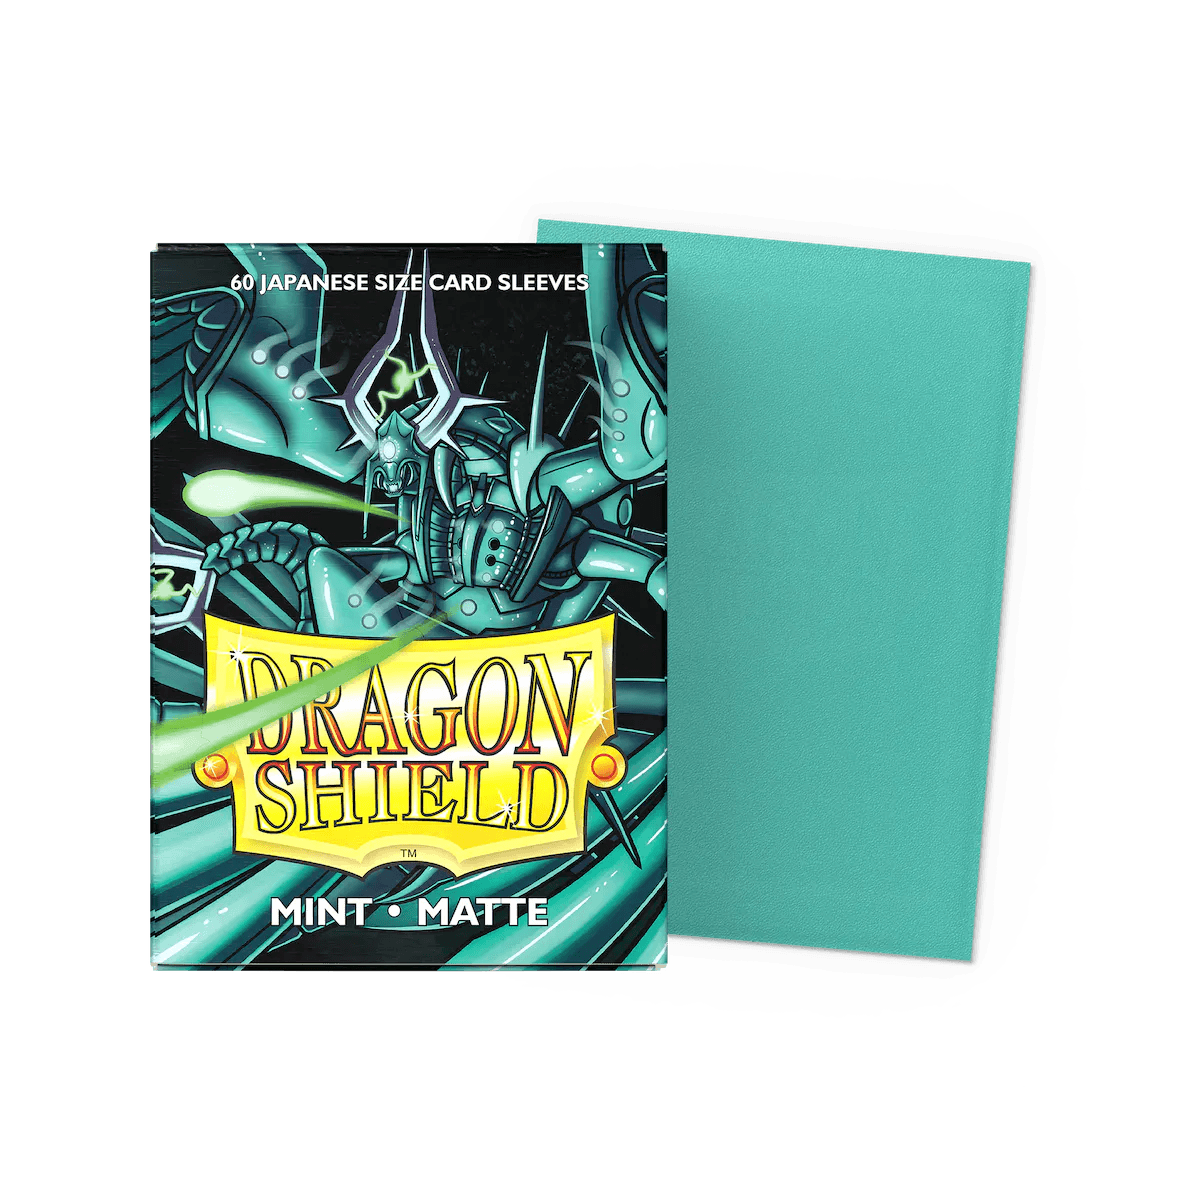 Dragon Shield - Matte Sleeves - Japanese Size - 60pk - Mint - The Card Vault